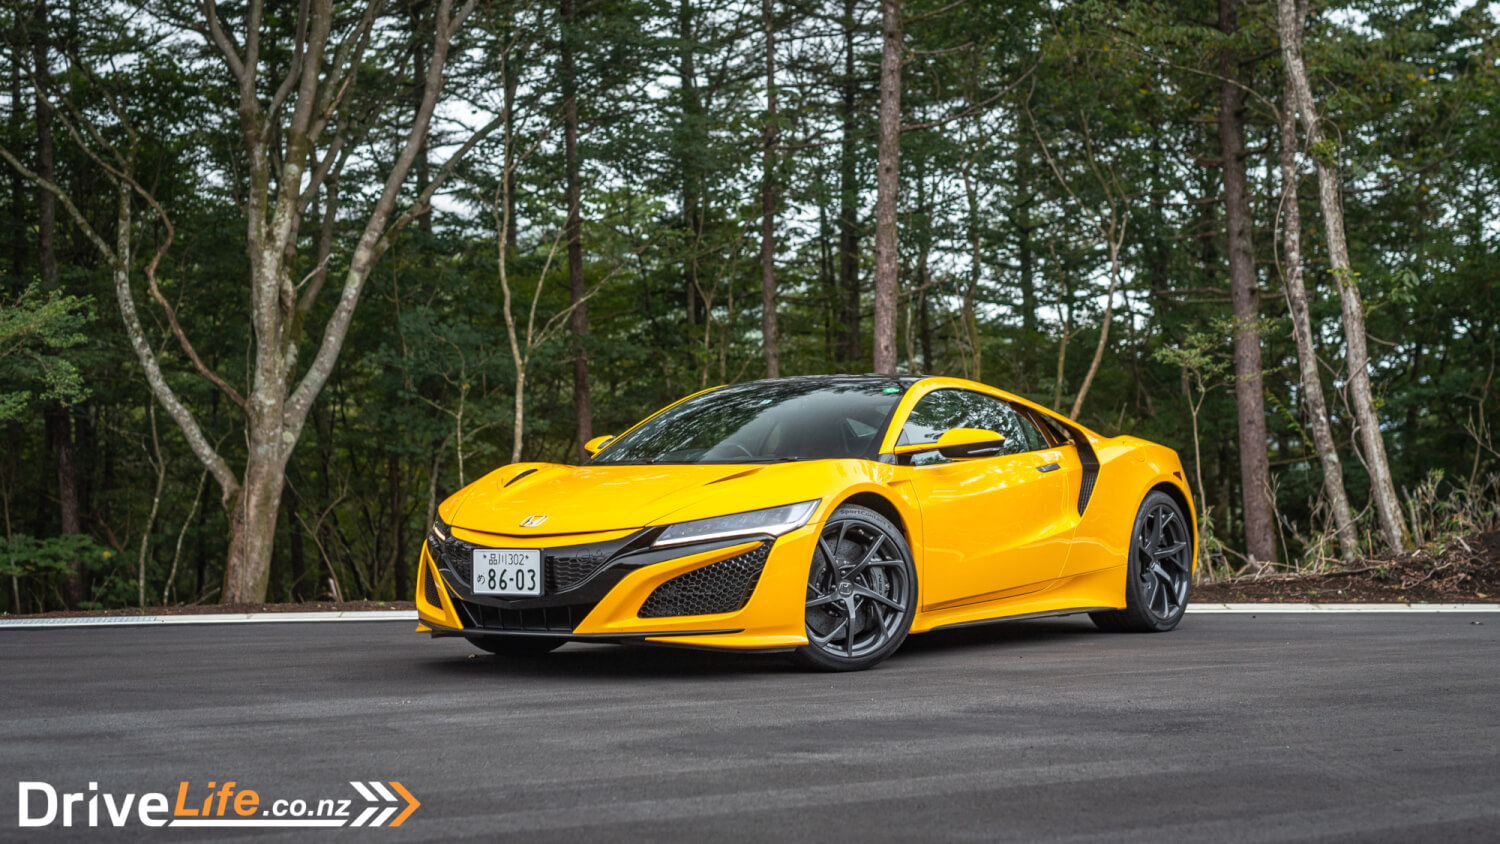 Five things about the 2020 Honda NSX - DriveLife